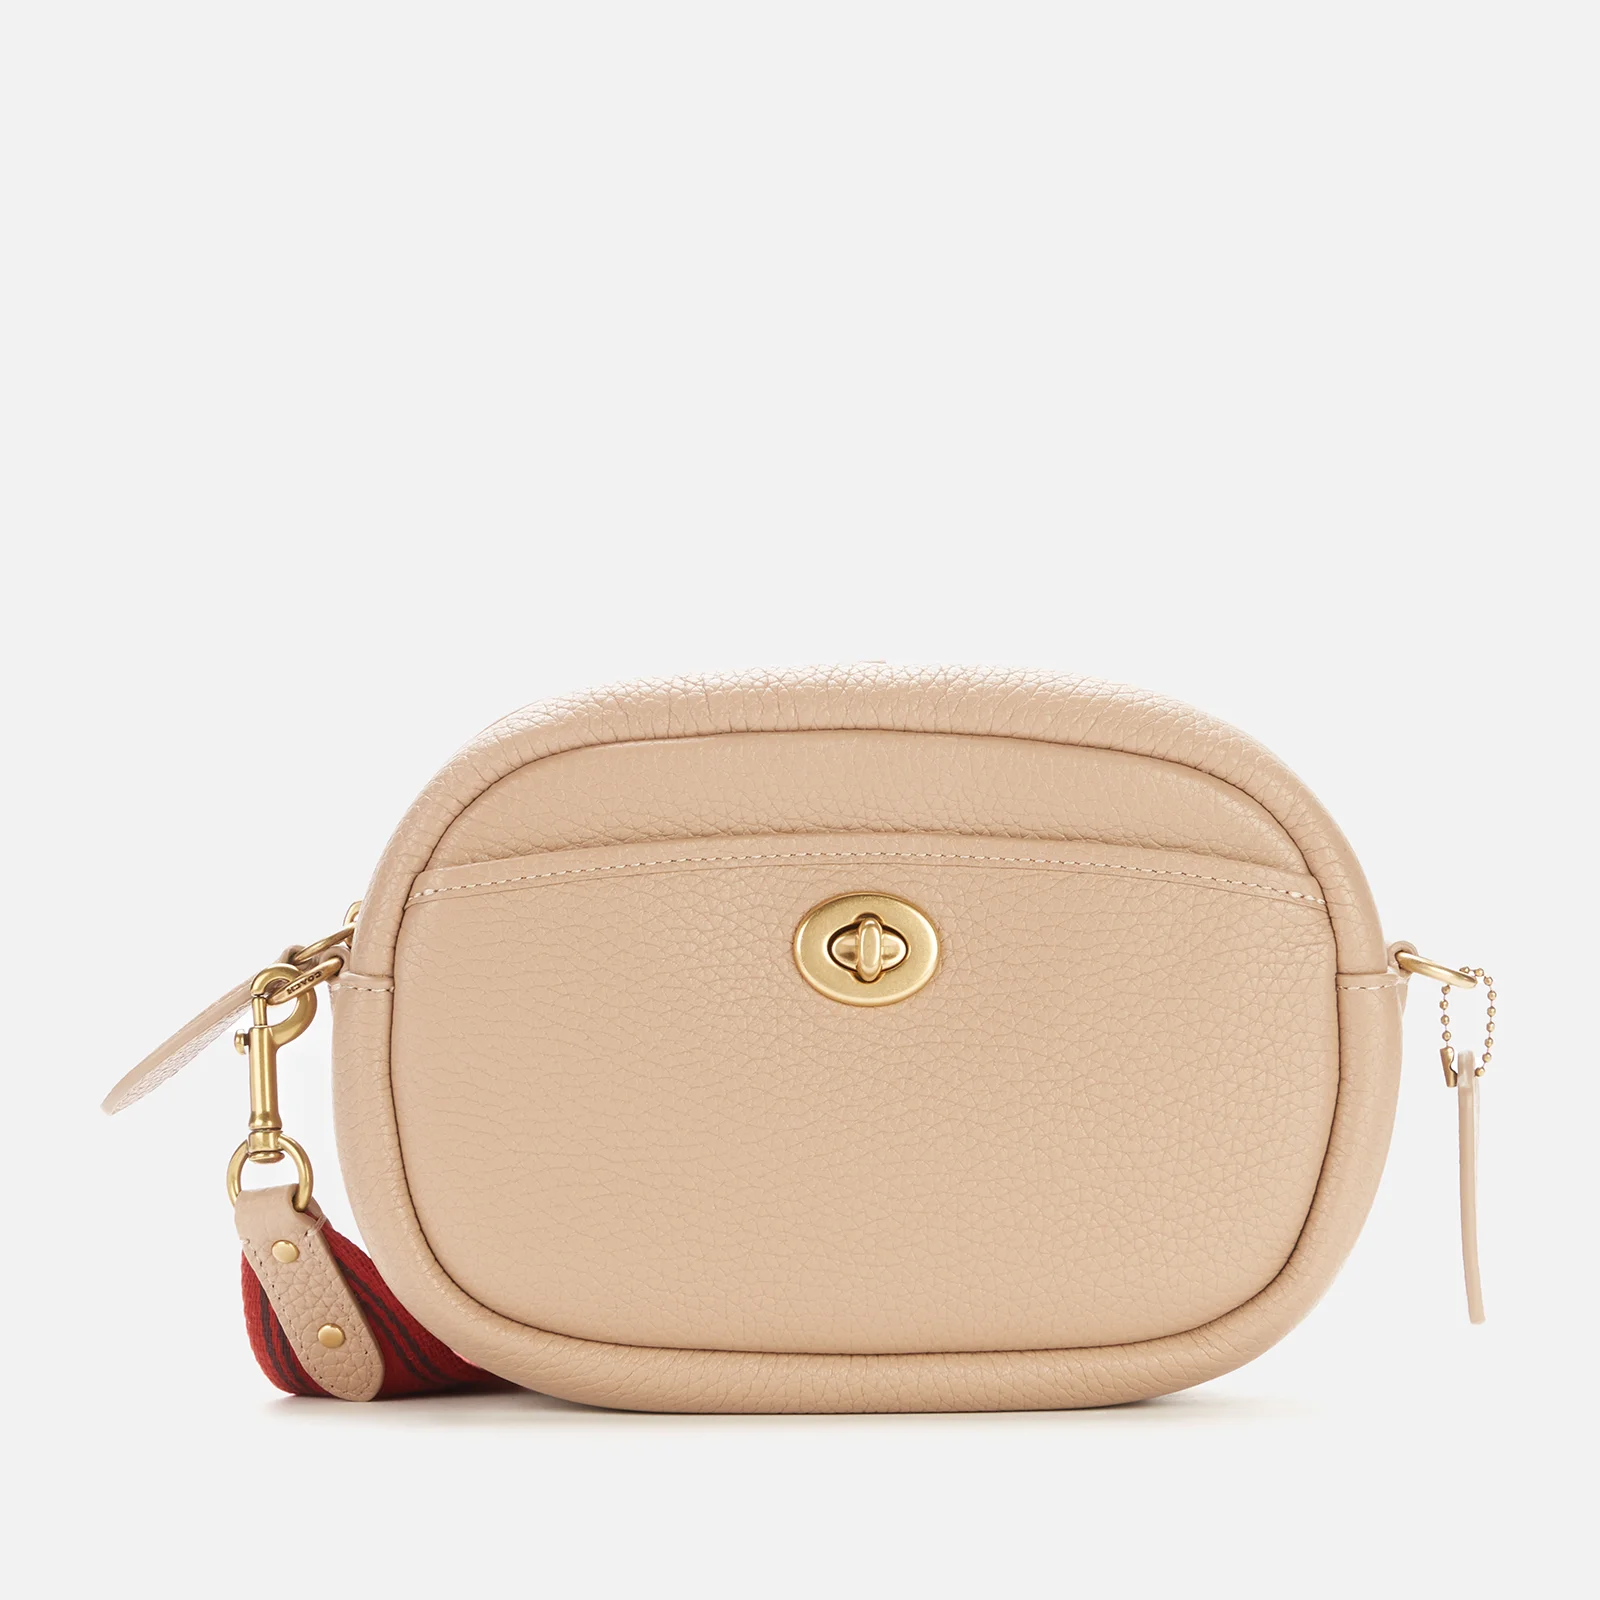 Coach Women's Soft Pebble Leather Camera Bag - Taupe Image 1